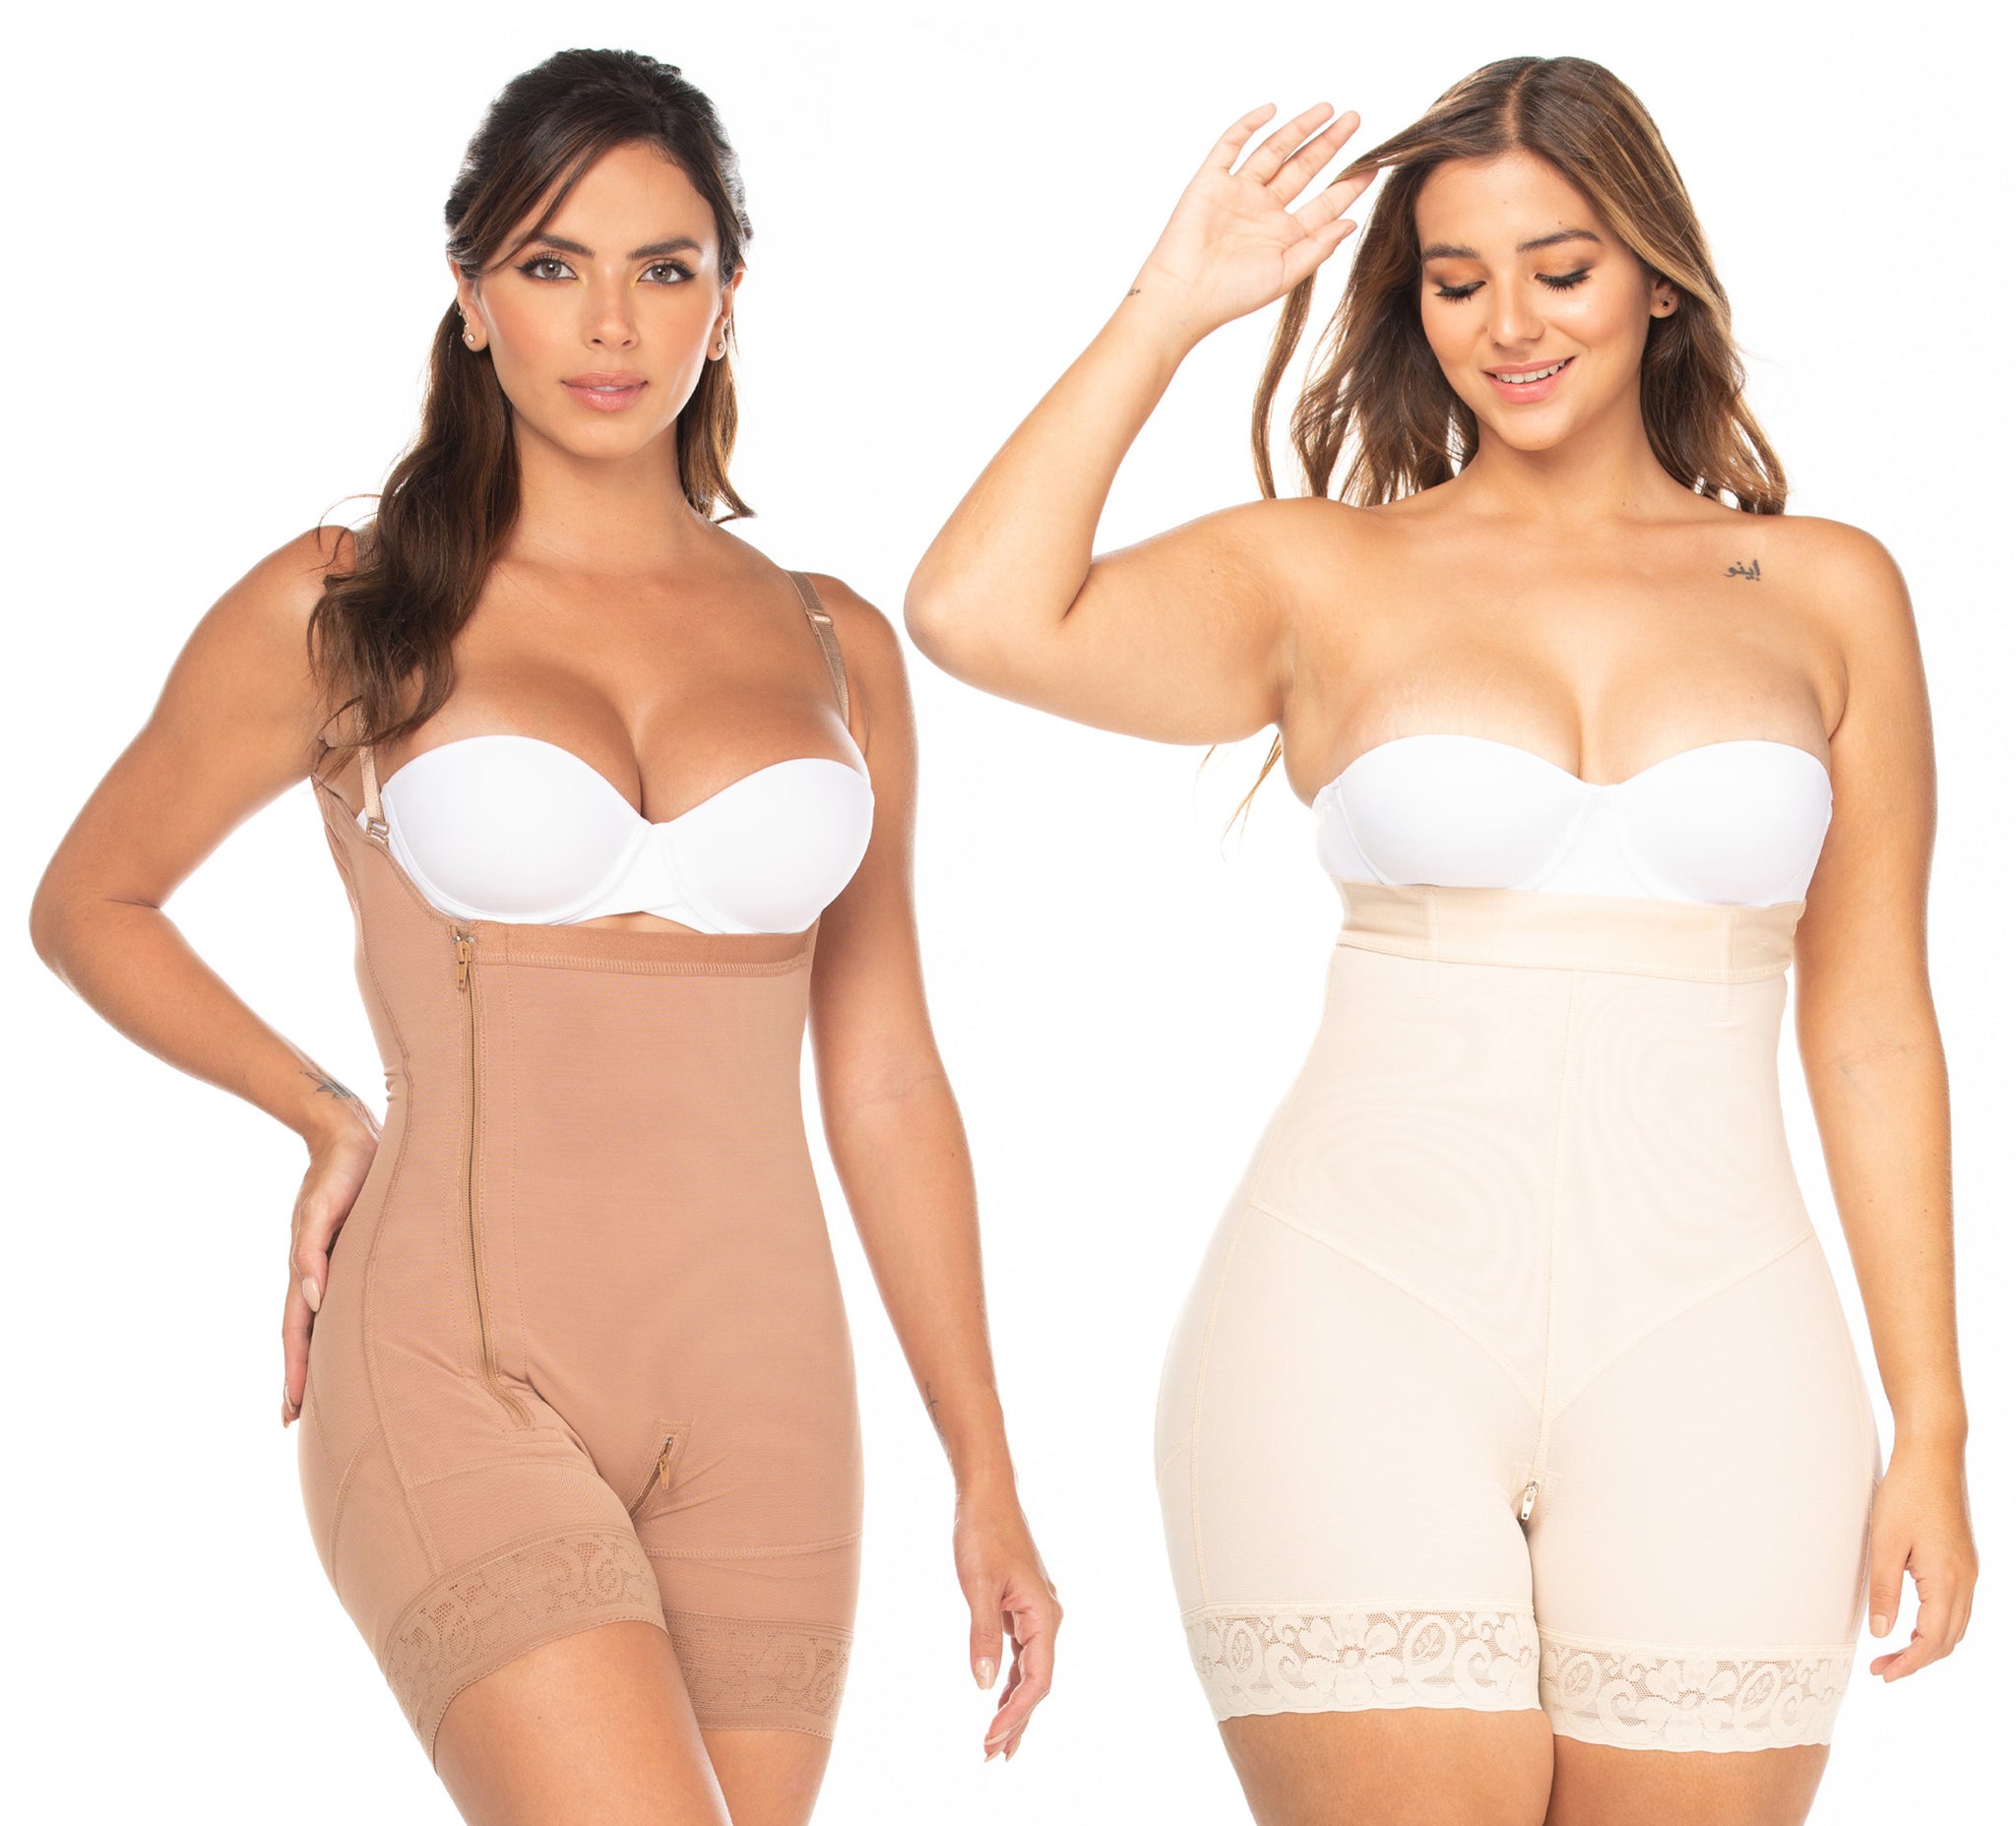 It's time to get back into shapewear